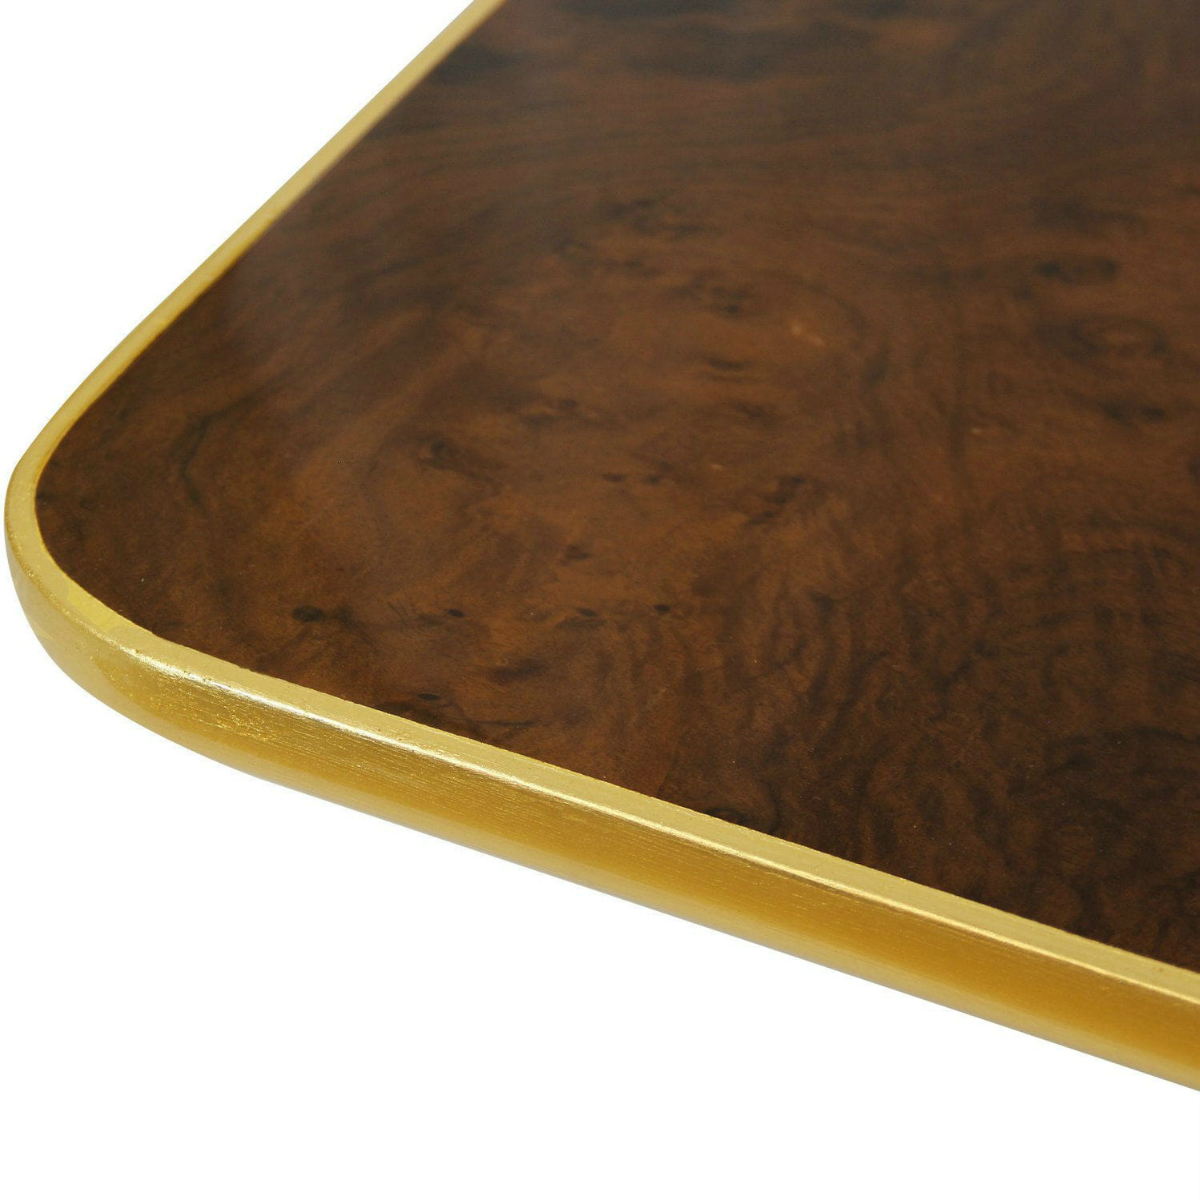 Sherwood Center Table: A Legendary Element For Your Living Room